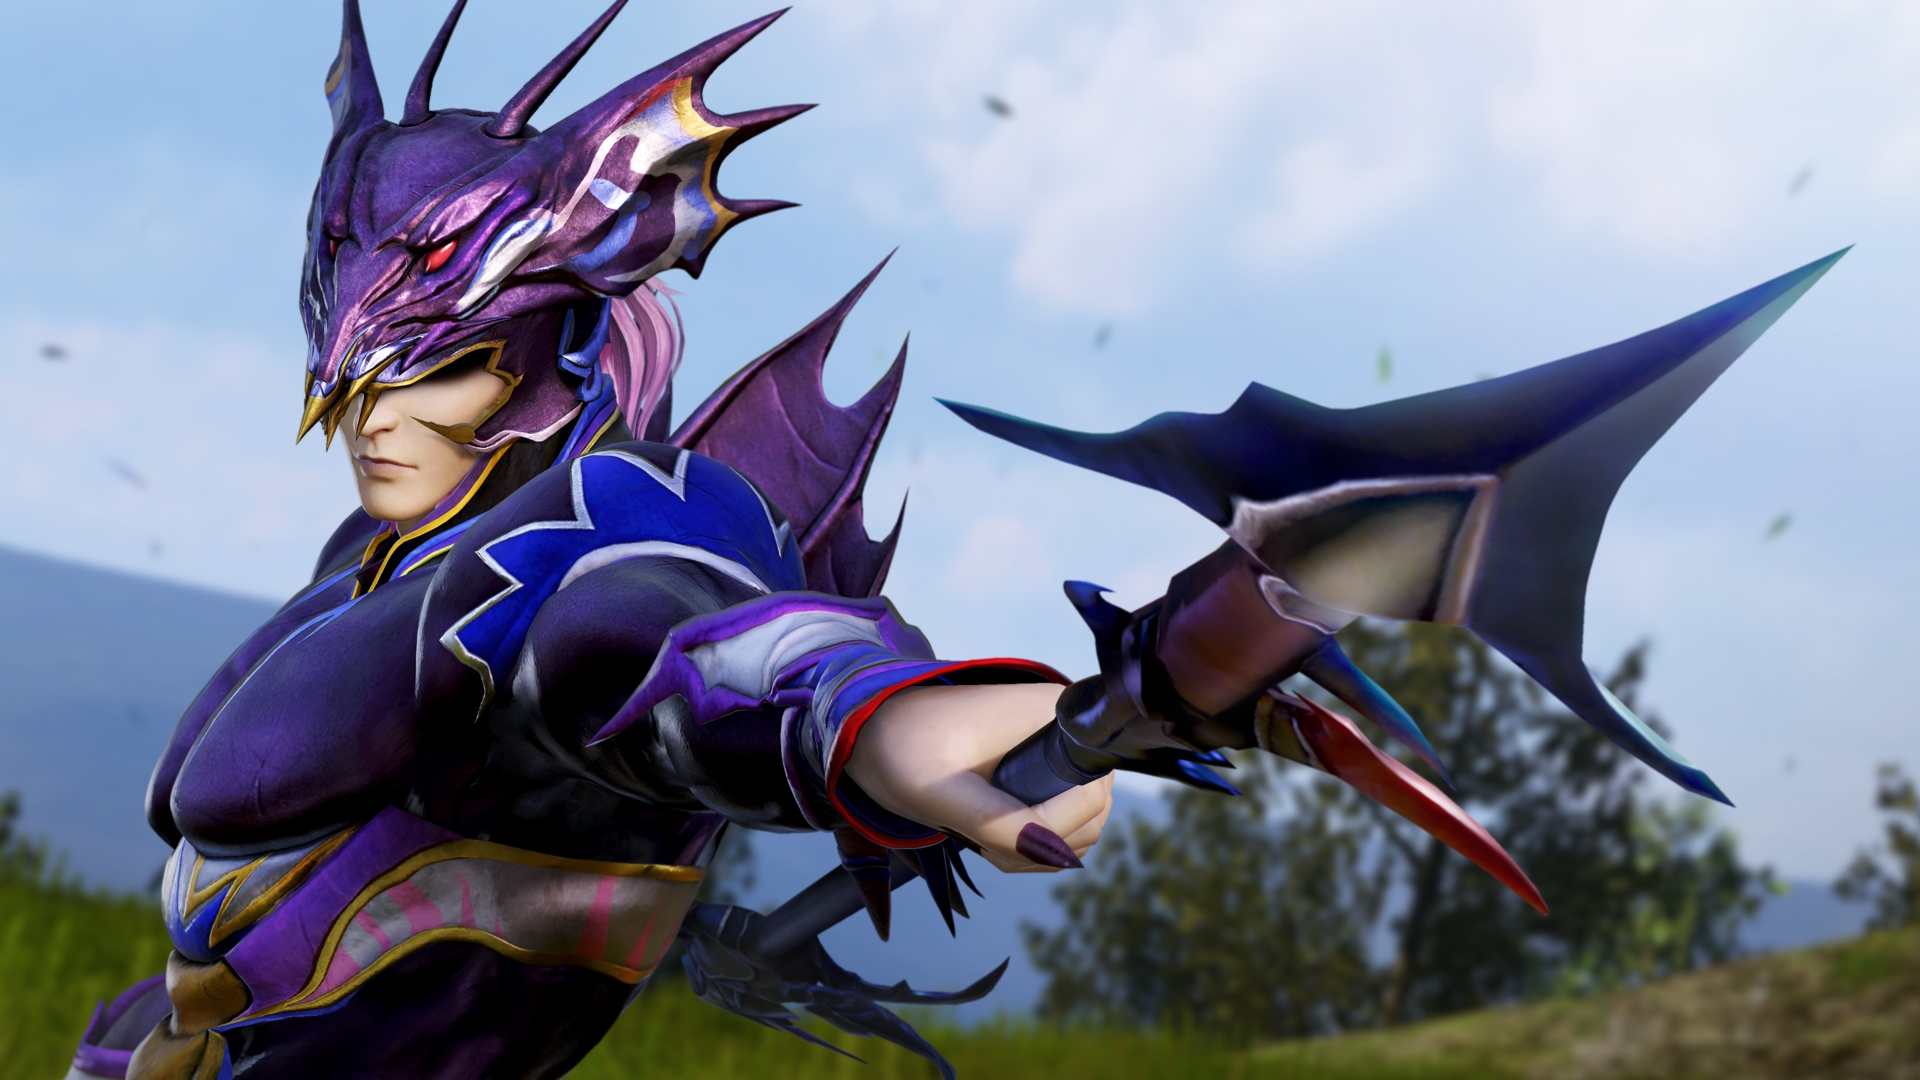 Wallpaper From Final Fantasy Iv - Kain Highwind Dissidia Nt , HD Wallpaper & Backgrounds